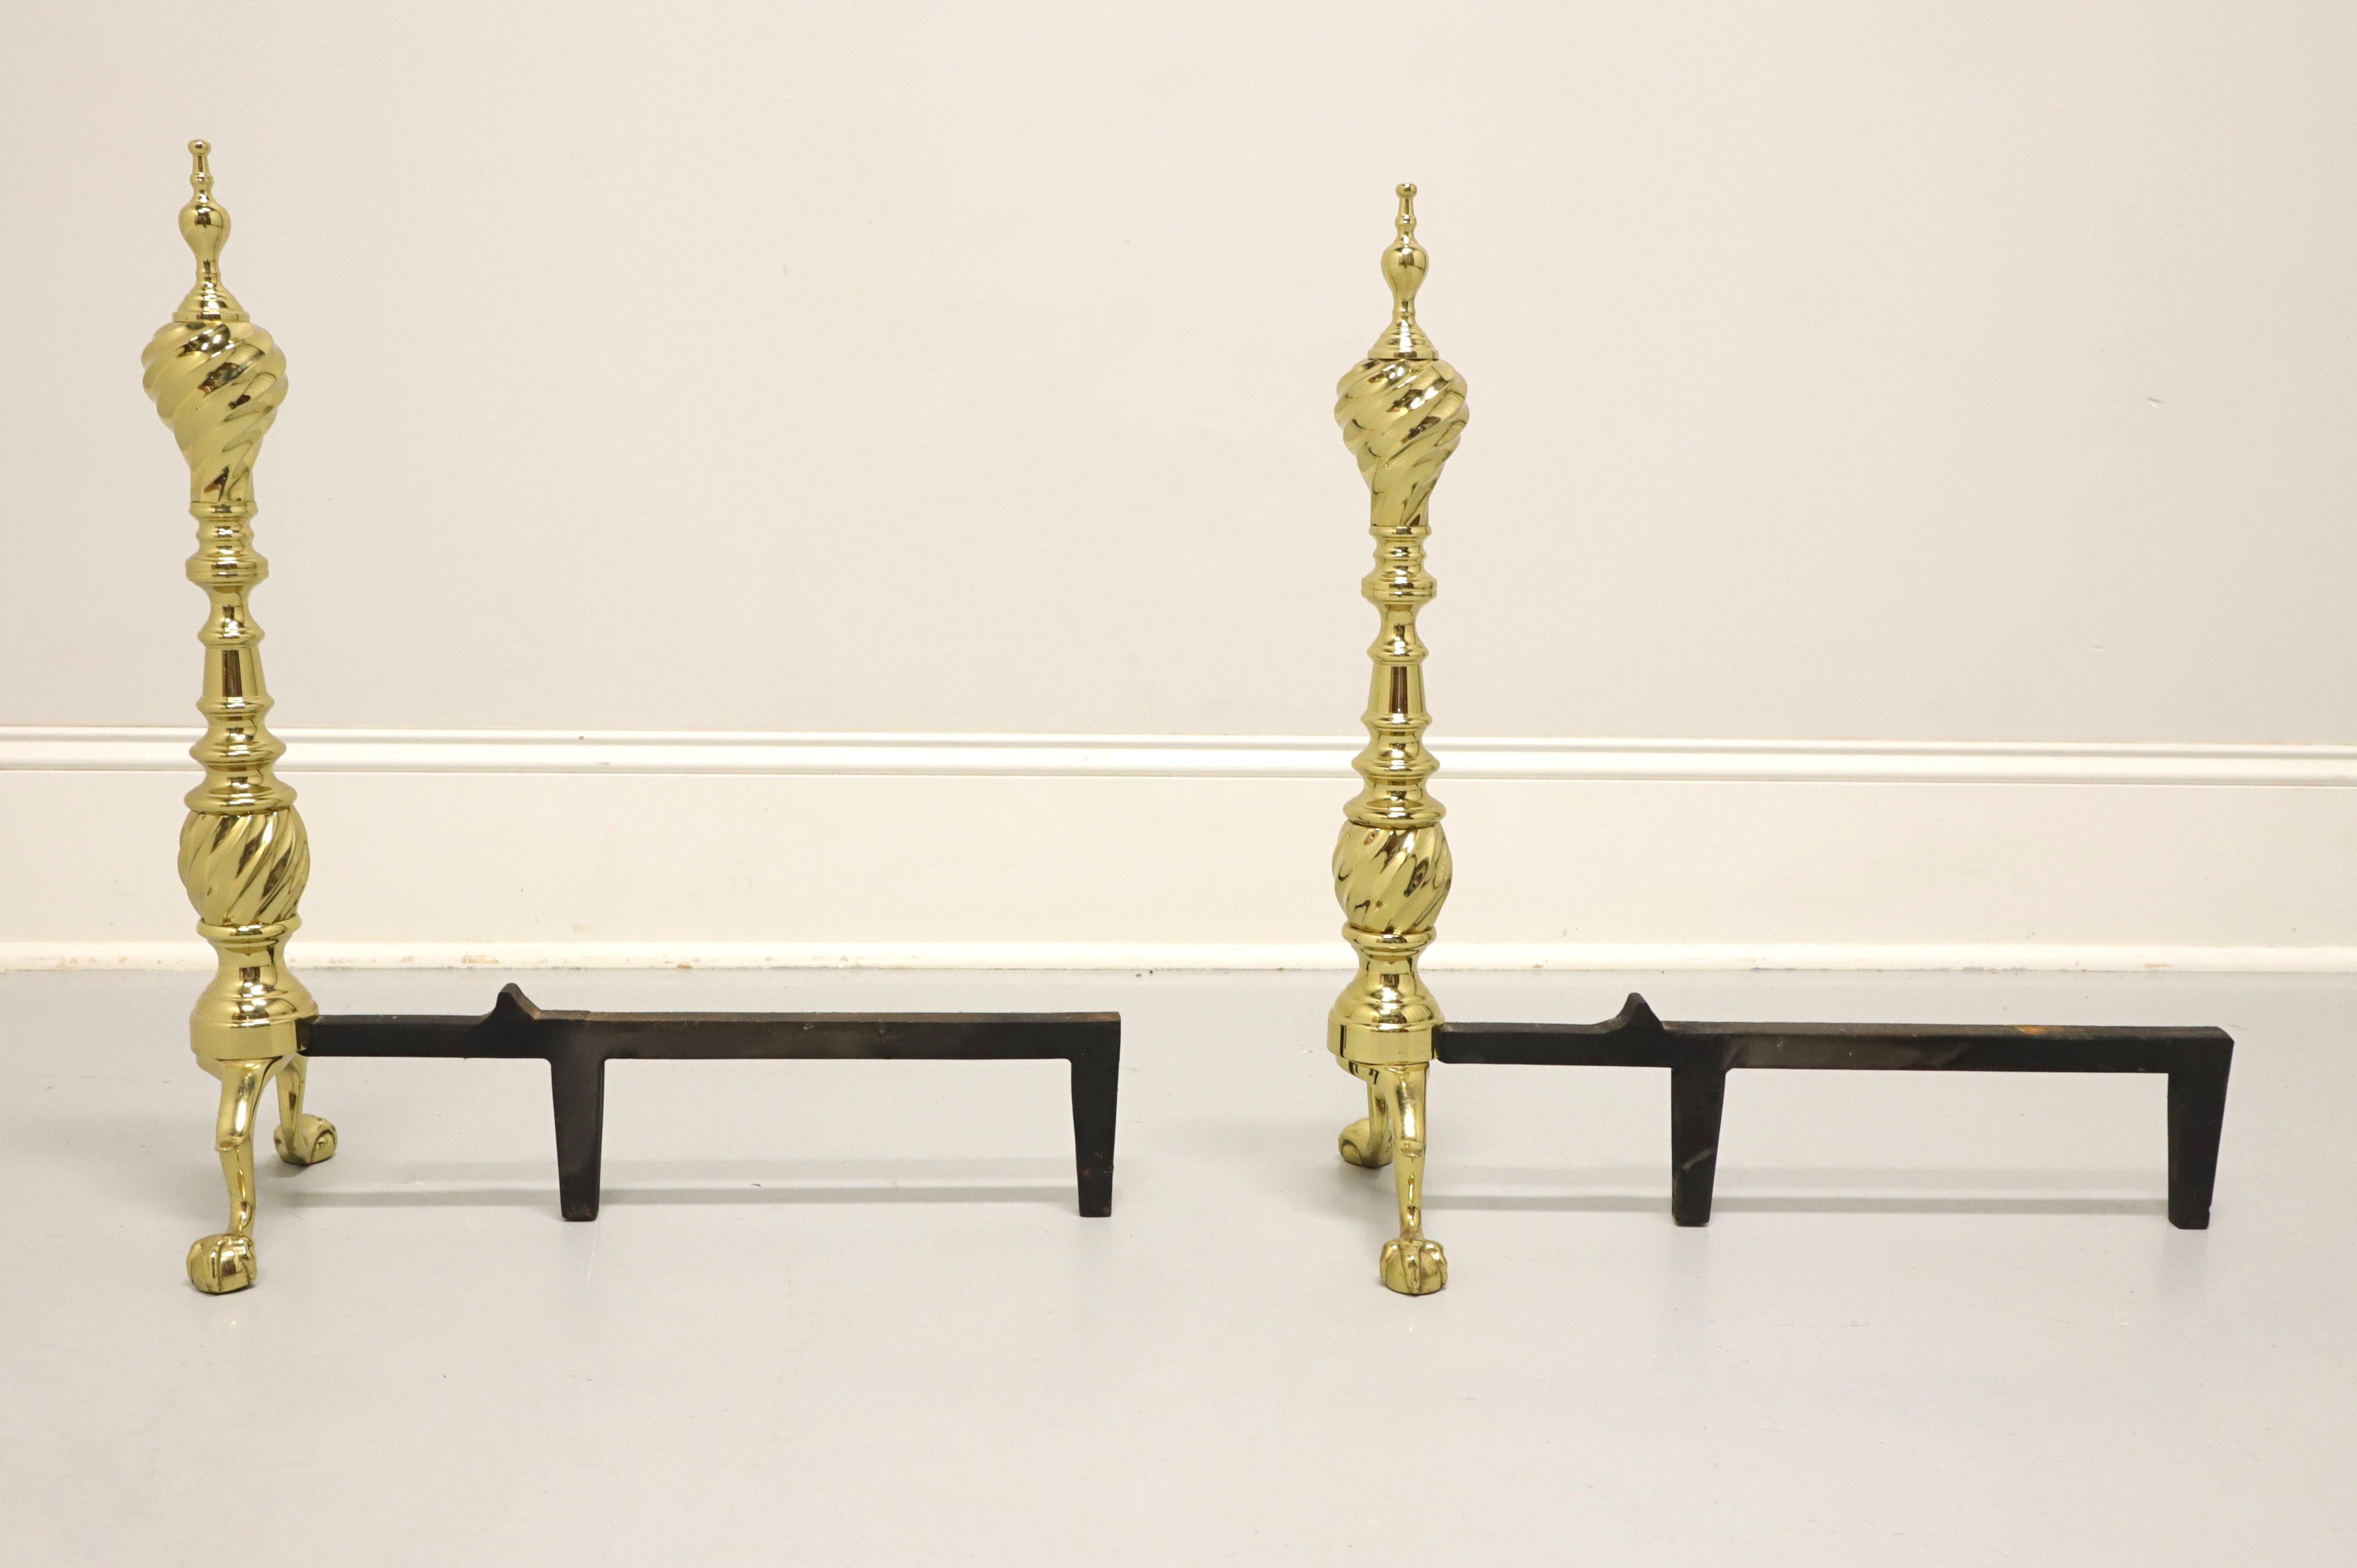 VIRGINIA METALCRAFTERS Middleton House Brass & Metal Fireplace Andirons - A In Good Condition For Sale In Charlotte, NC